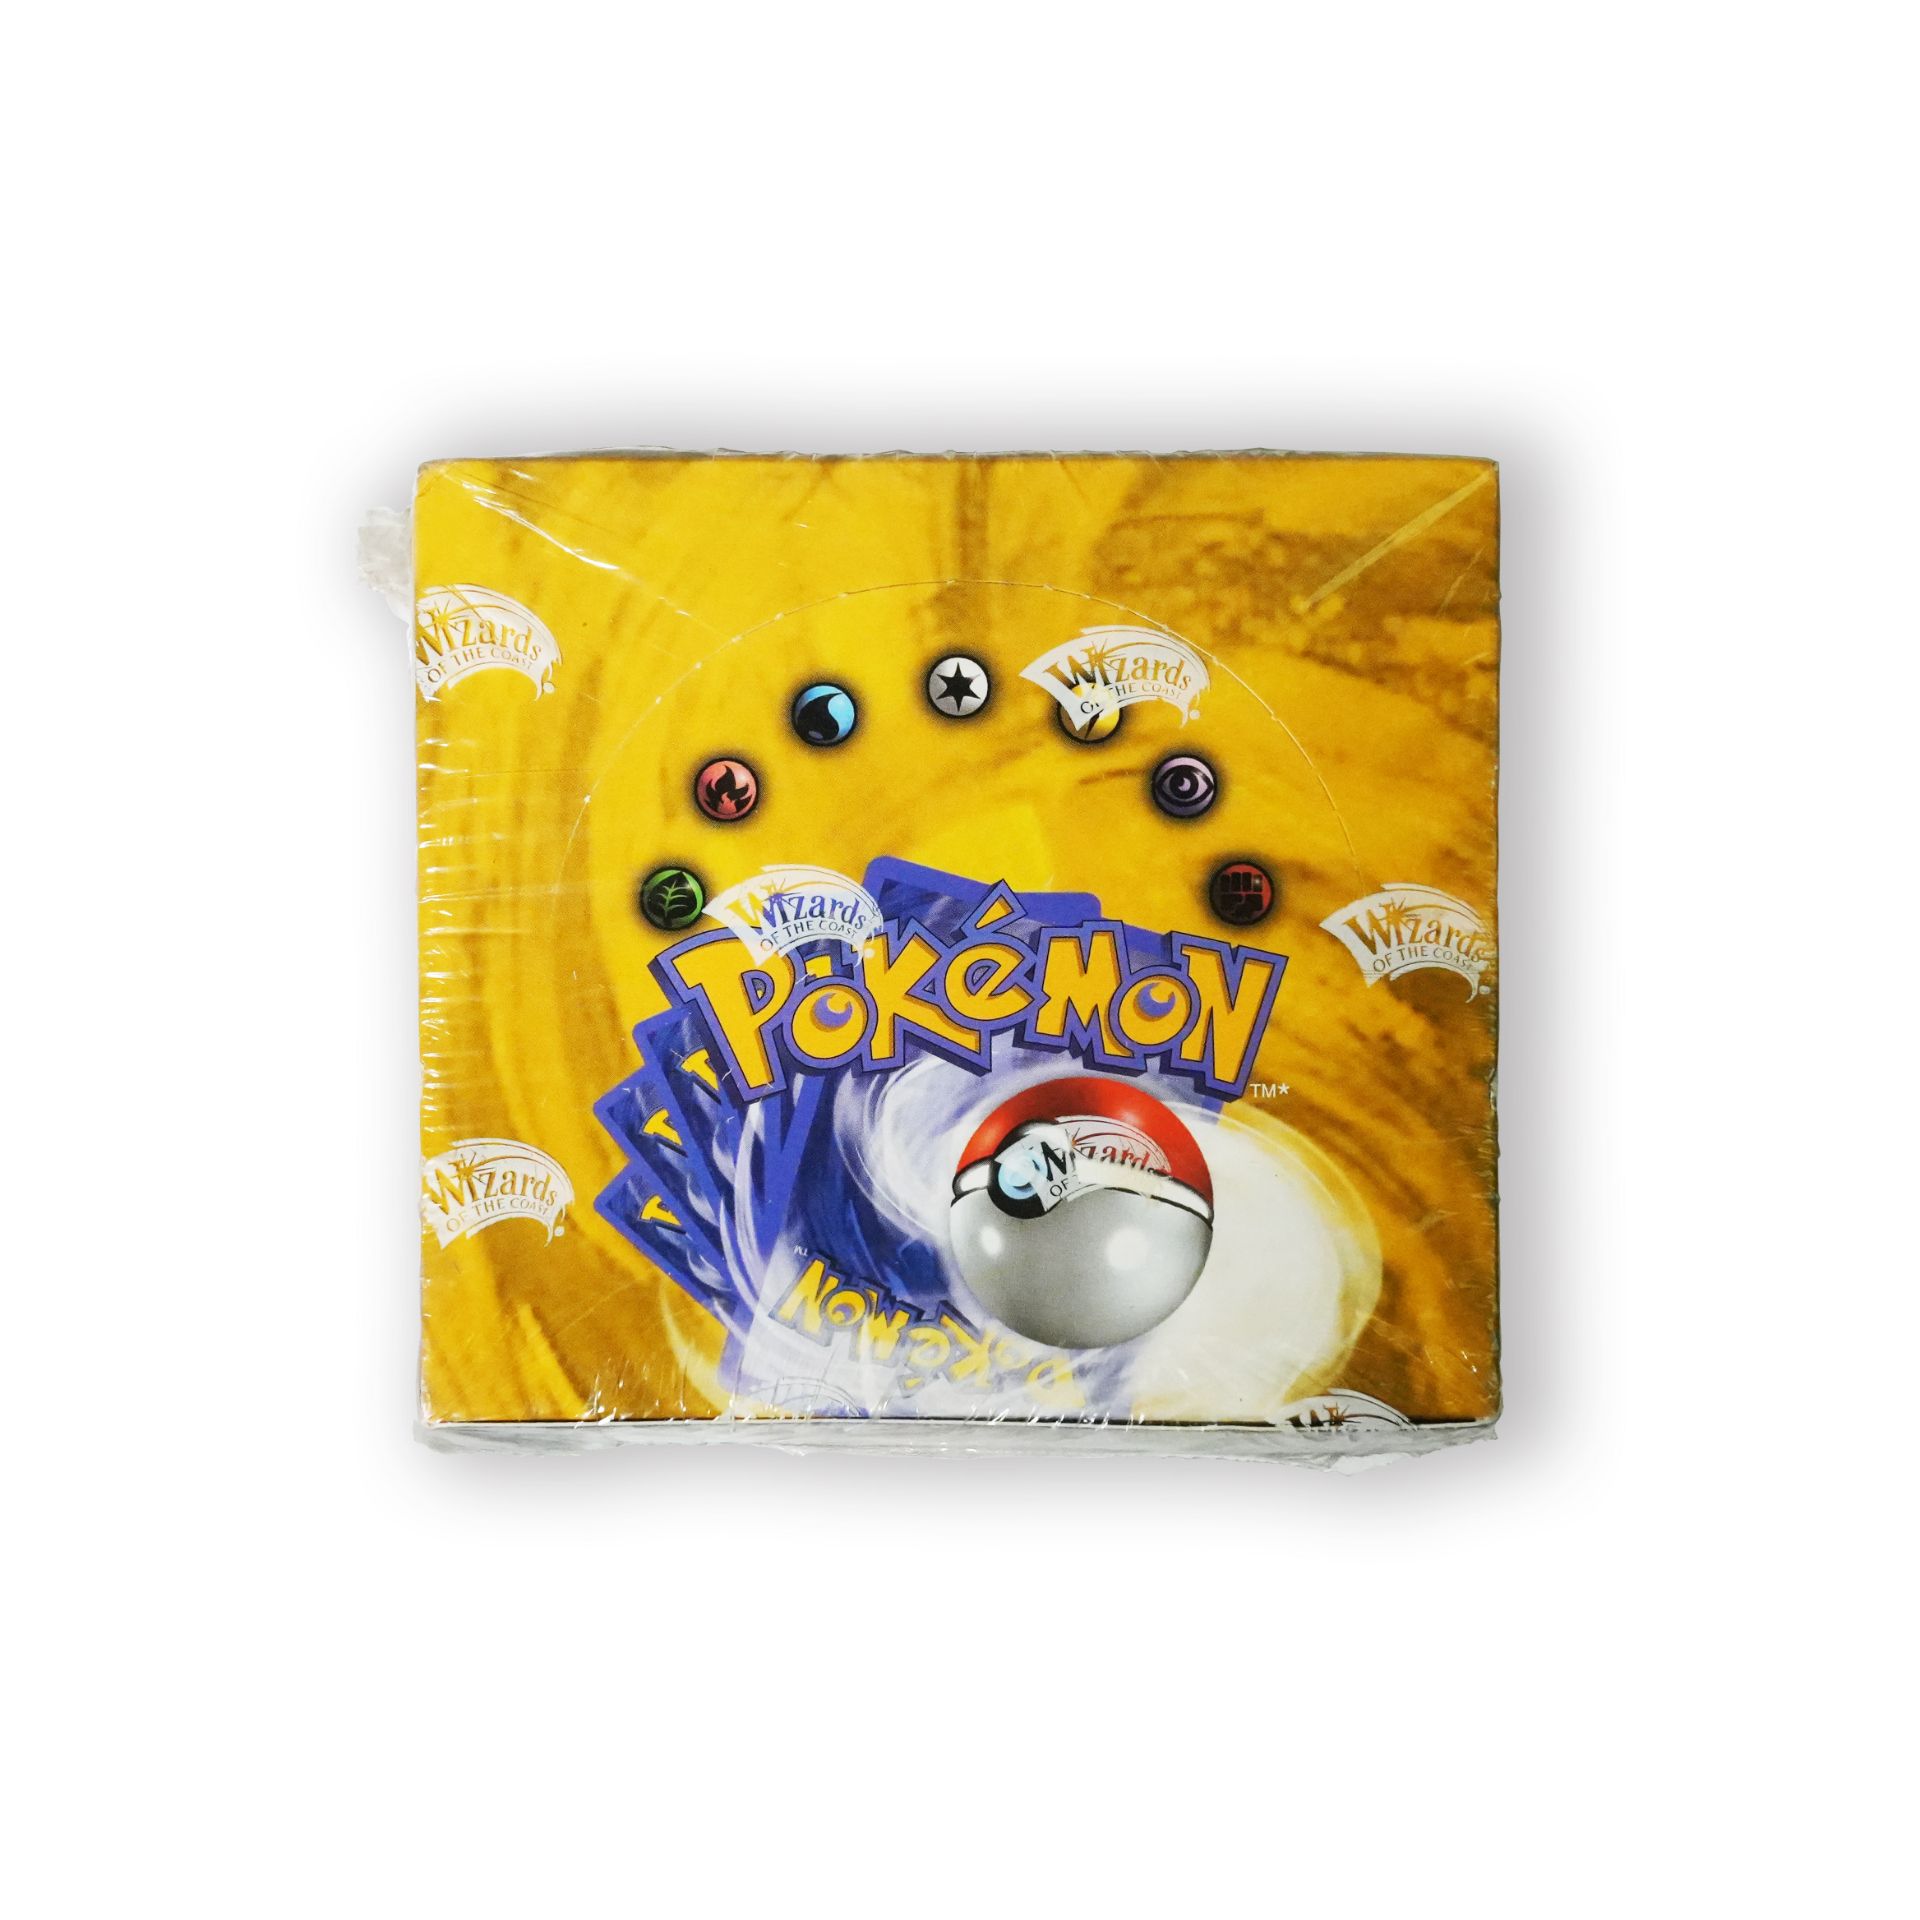 Pokemon TCG - 4th Print Base Set Booster Box - Sealed - This lot contains 1x sealed 4th print base - Image 2 of 6